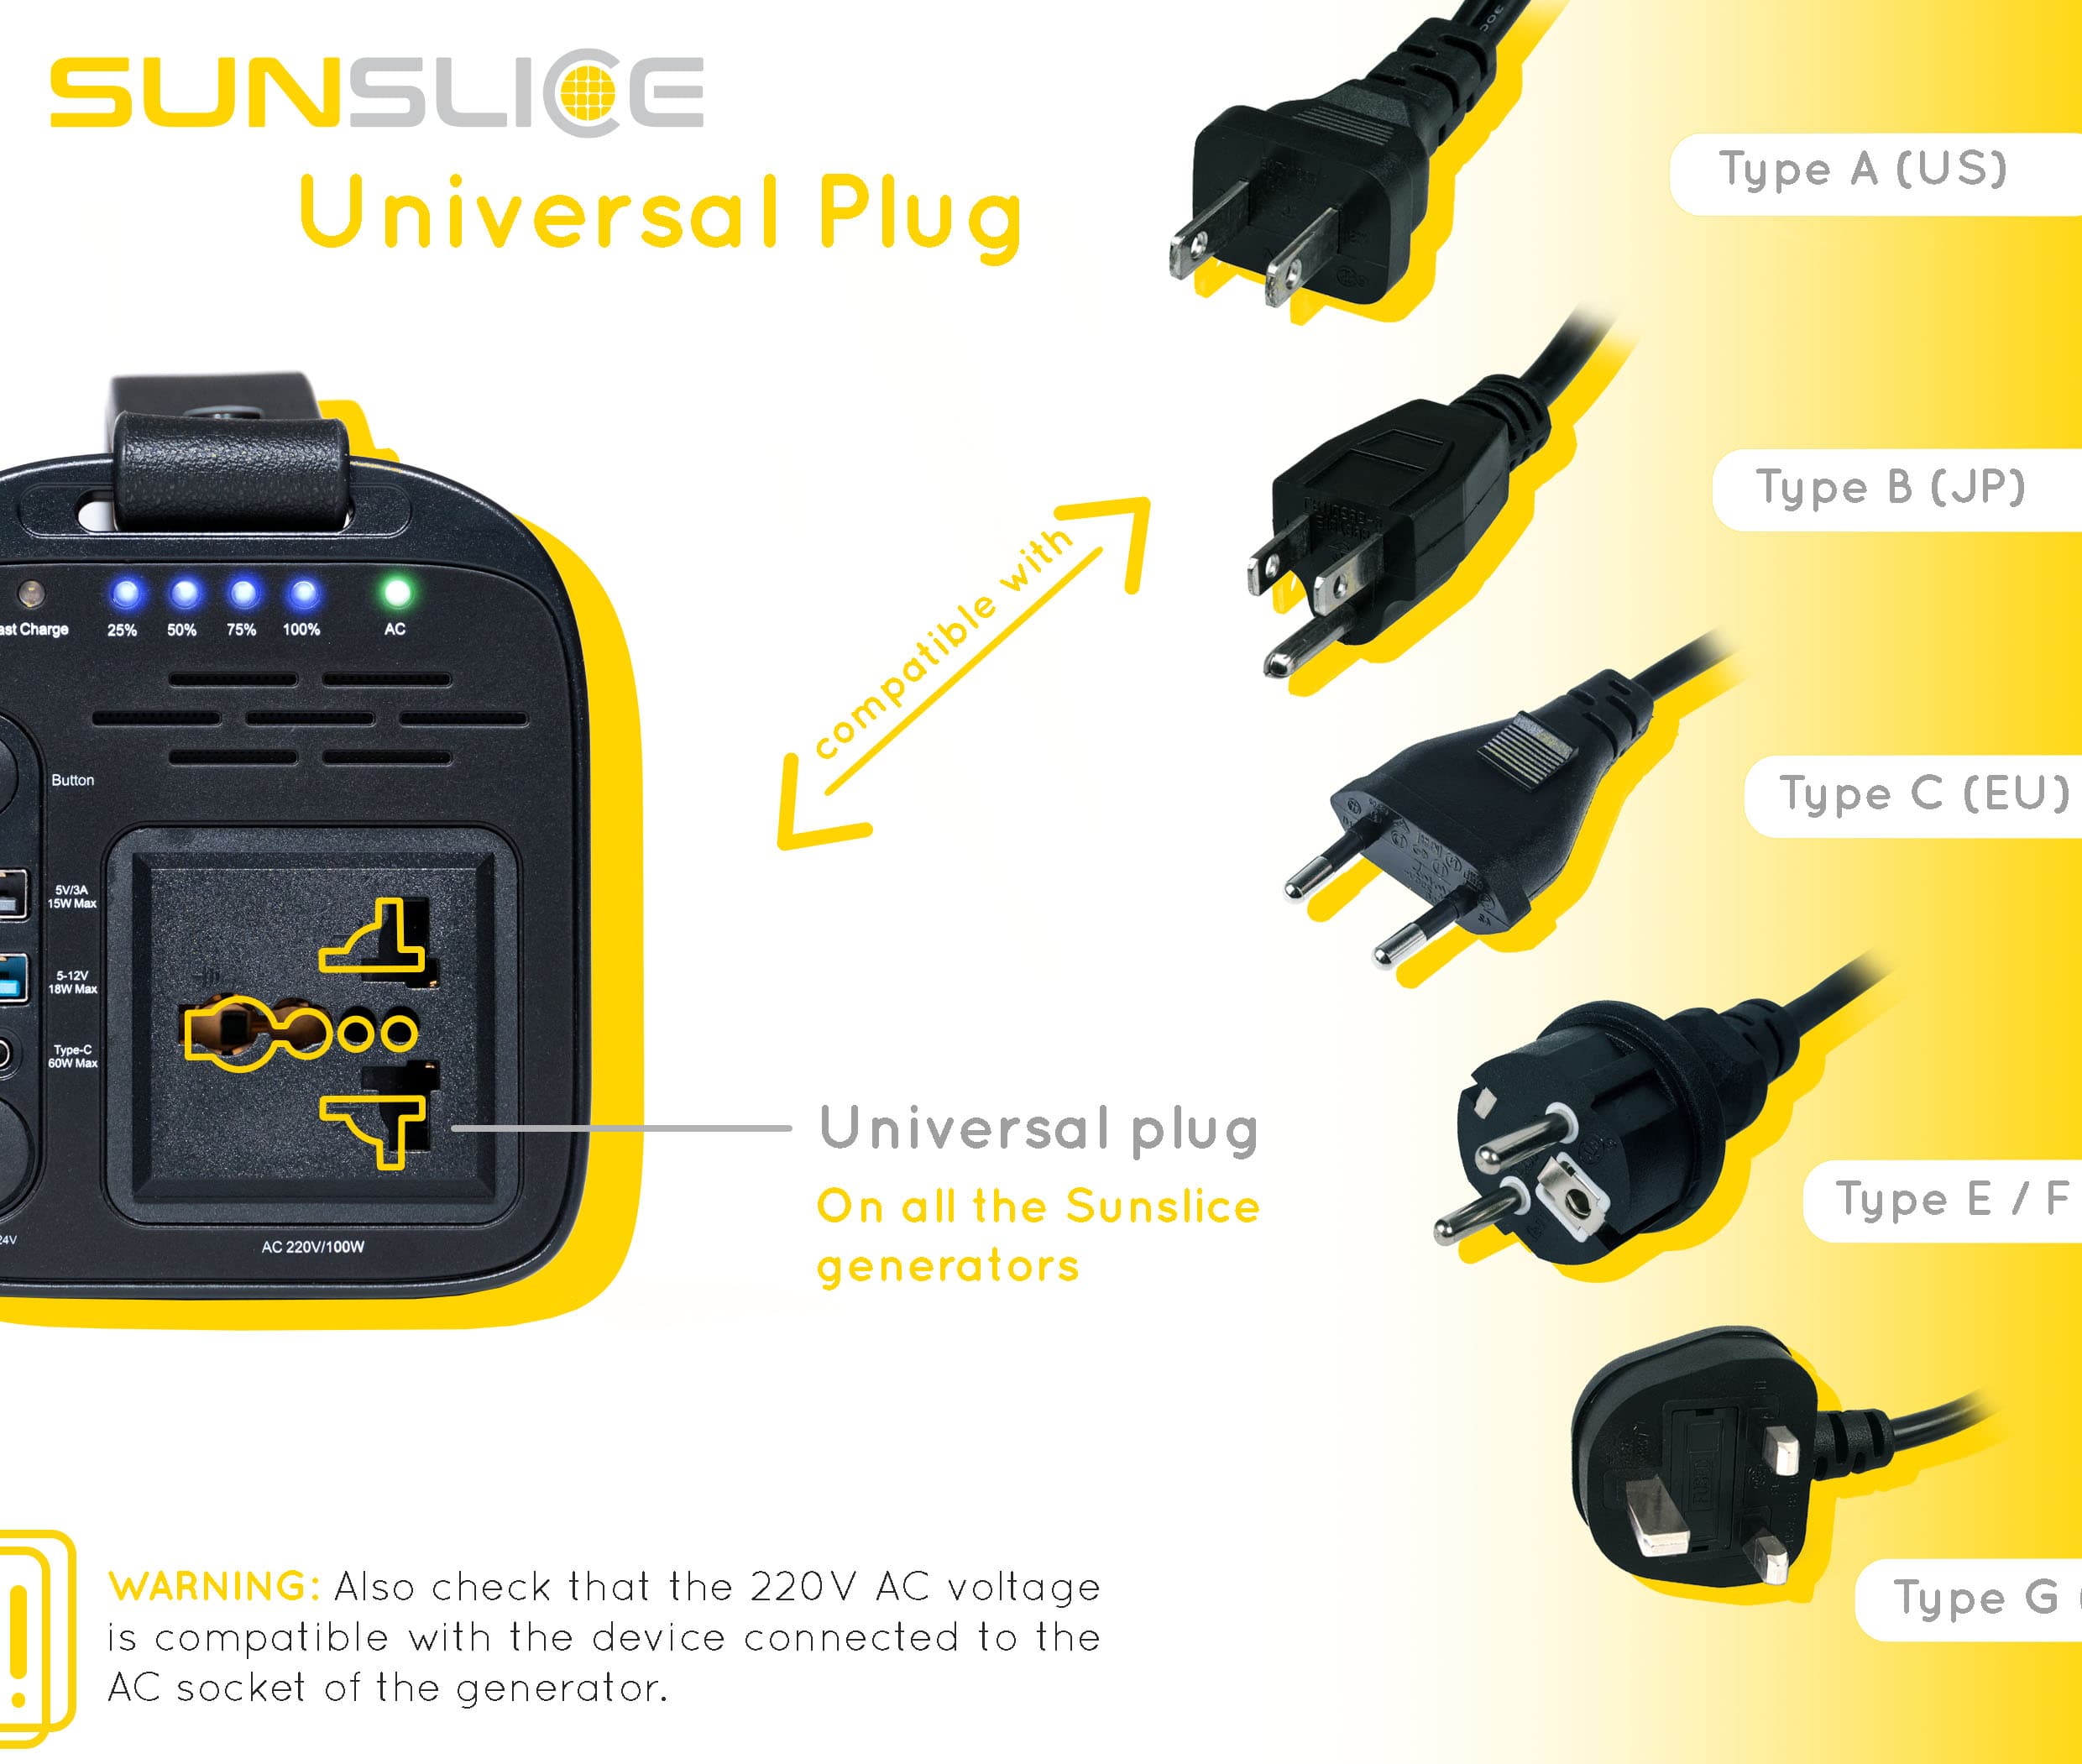 Explaination on the different type of plug who go into a Universal plug on all the sunslice generator